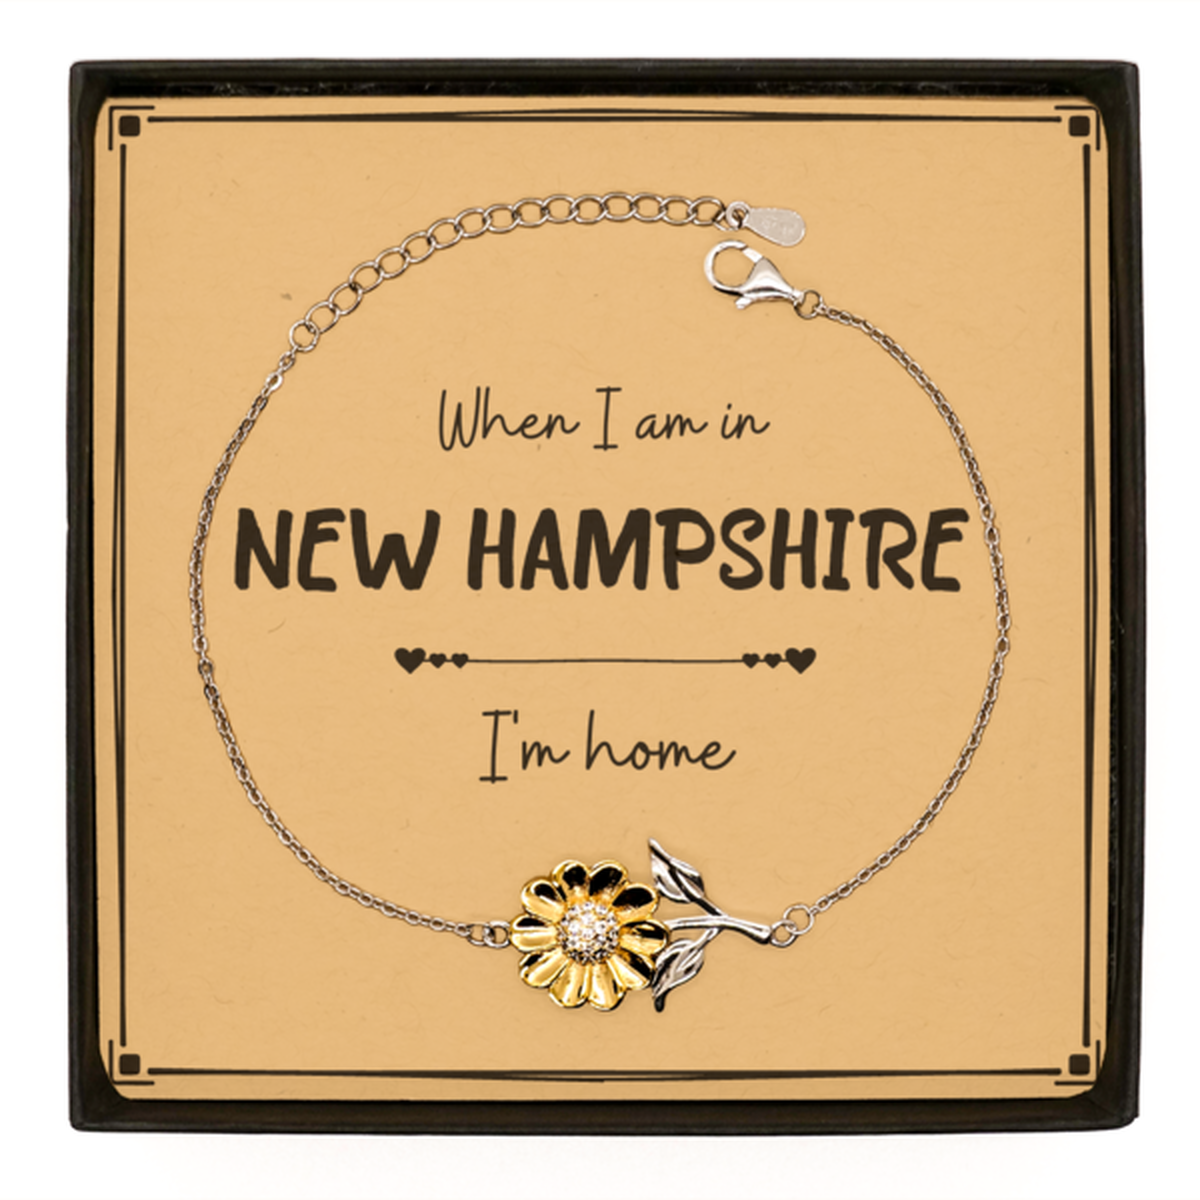 When I am in New Hampshire I'm home Sunflower Bracelet, Message Card Gifts For New Hampshire, State New Hampshire Birthday Gifts for Friends Coworker